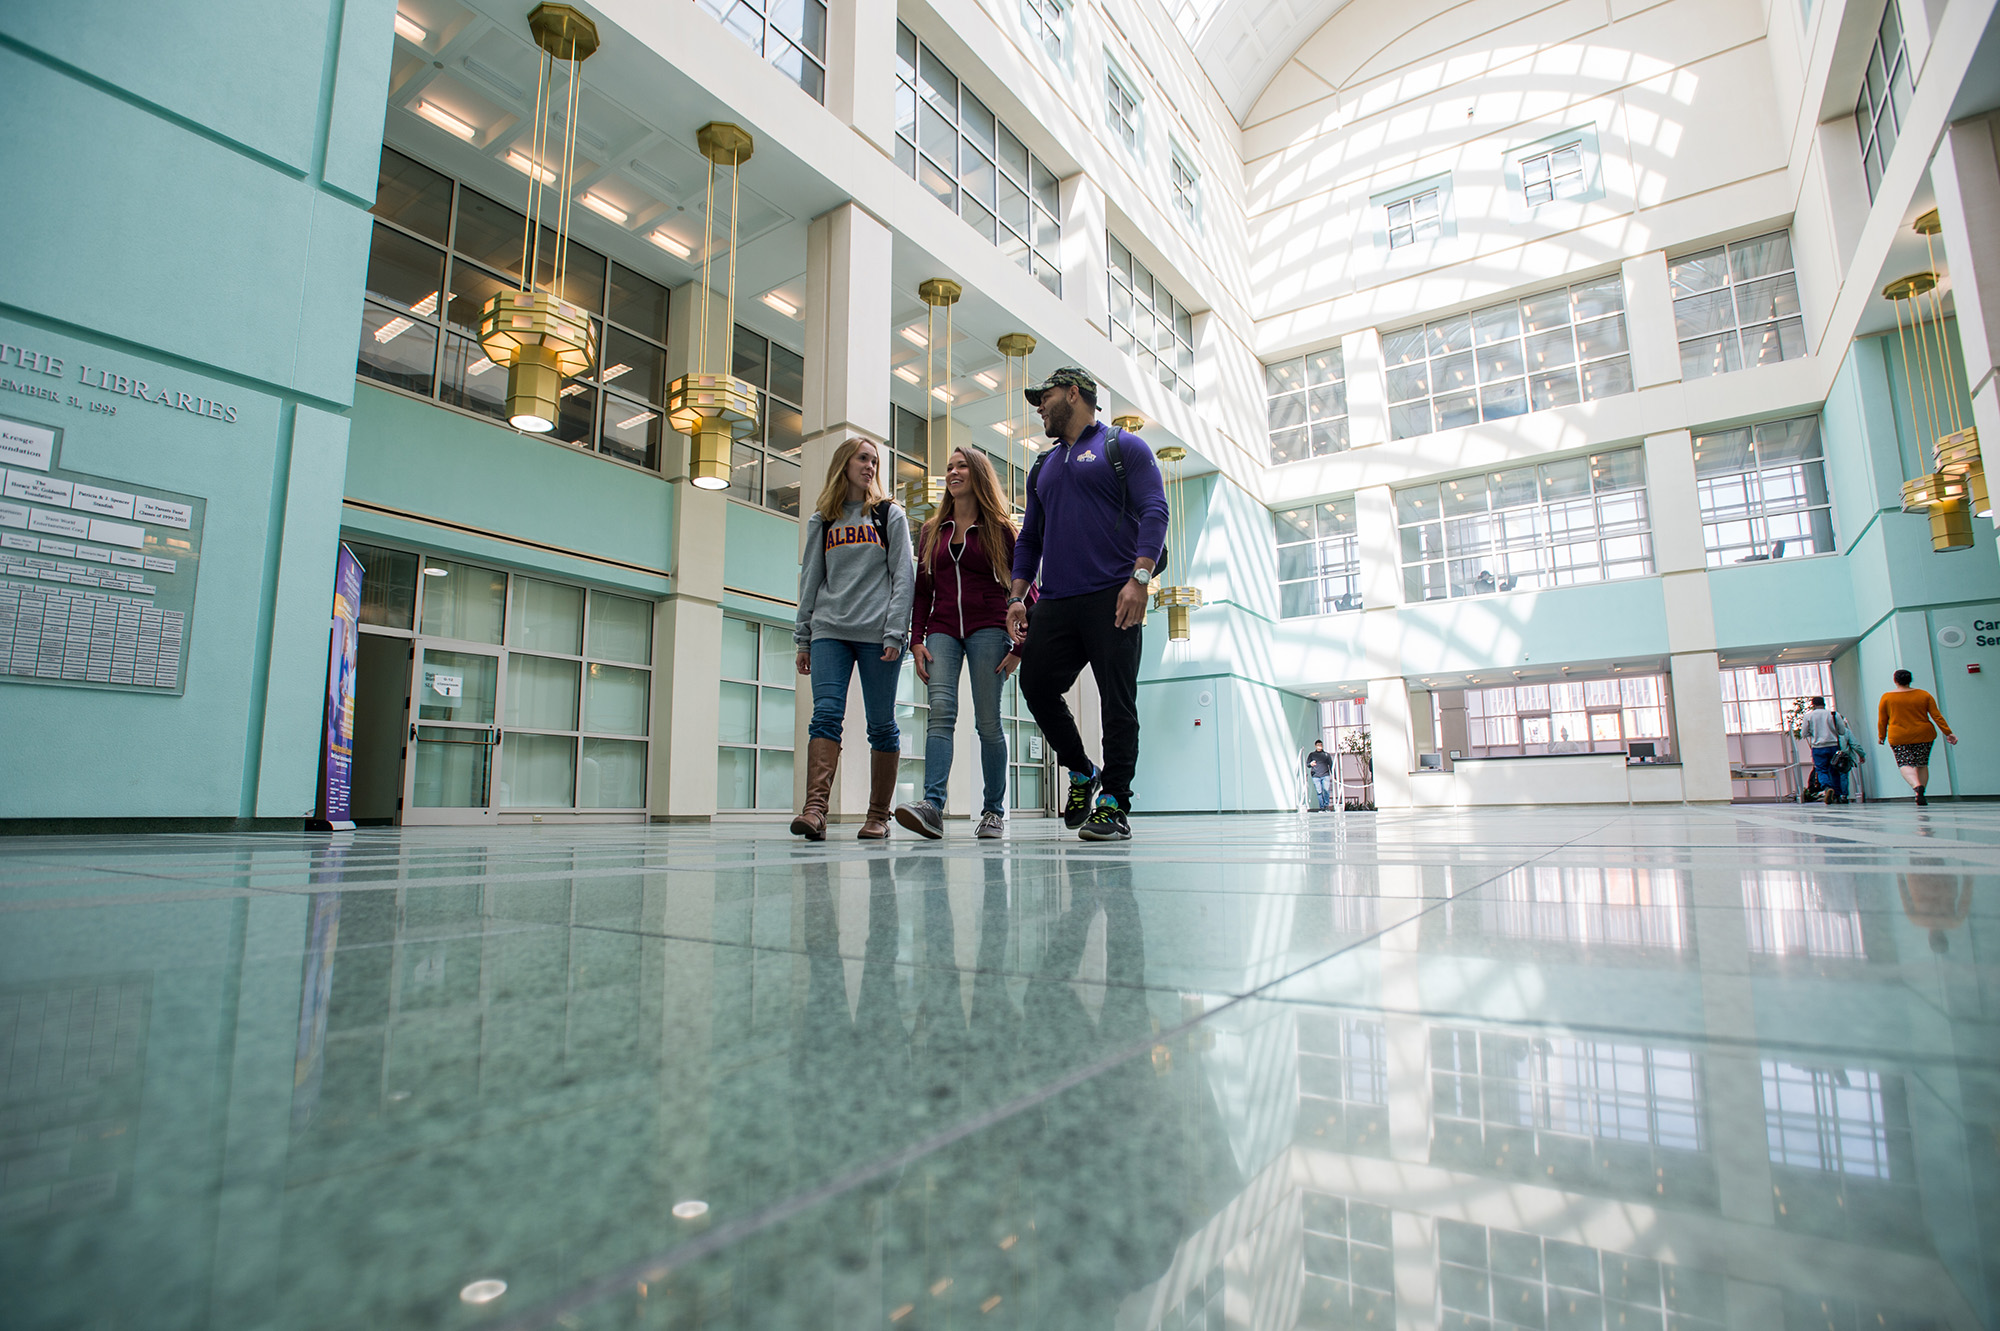 Three students walking in the UAlbany Science Library atrium.